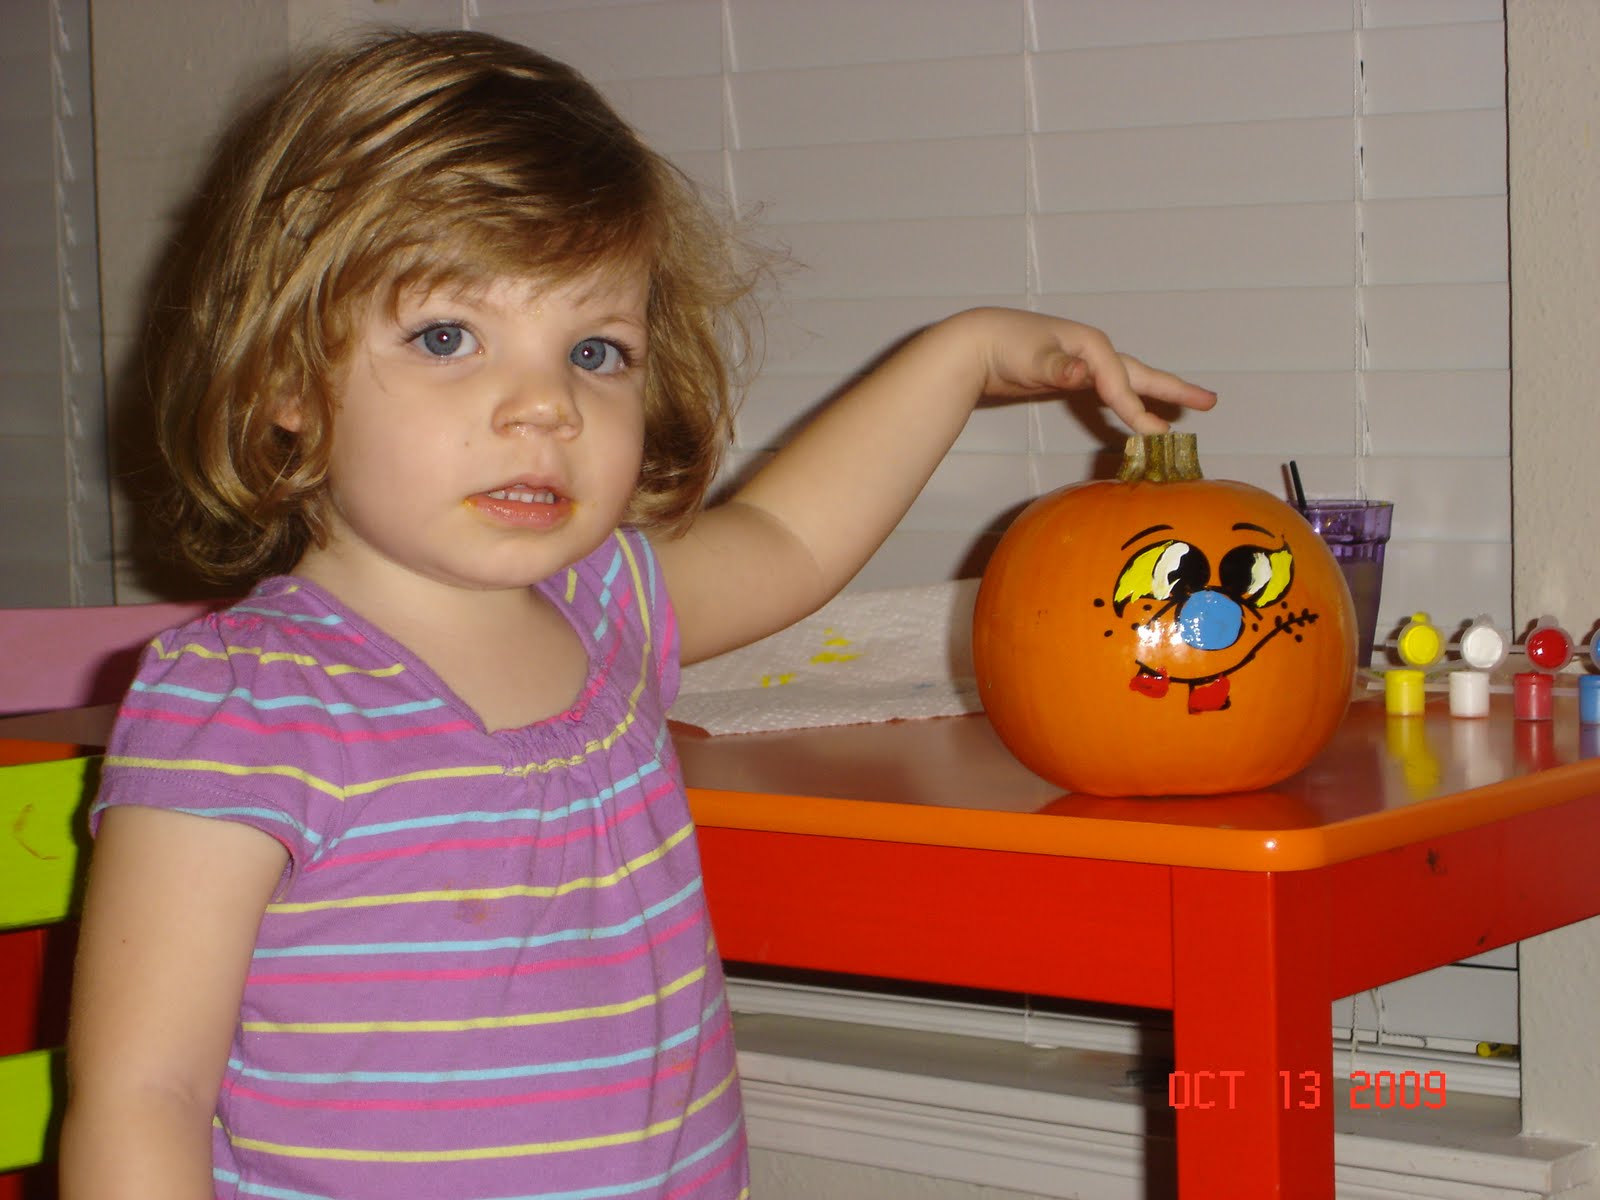 [silly+glasses+and+painting+pumpkins+009.jpg]